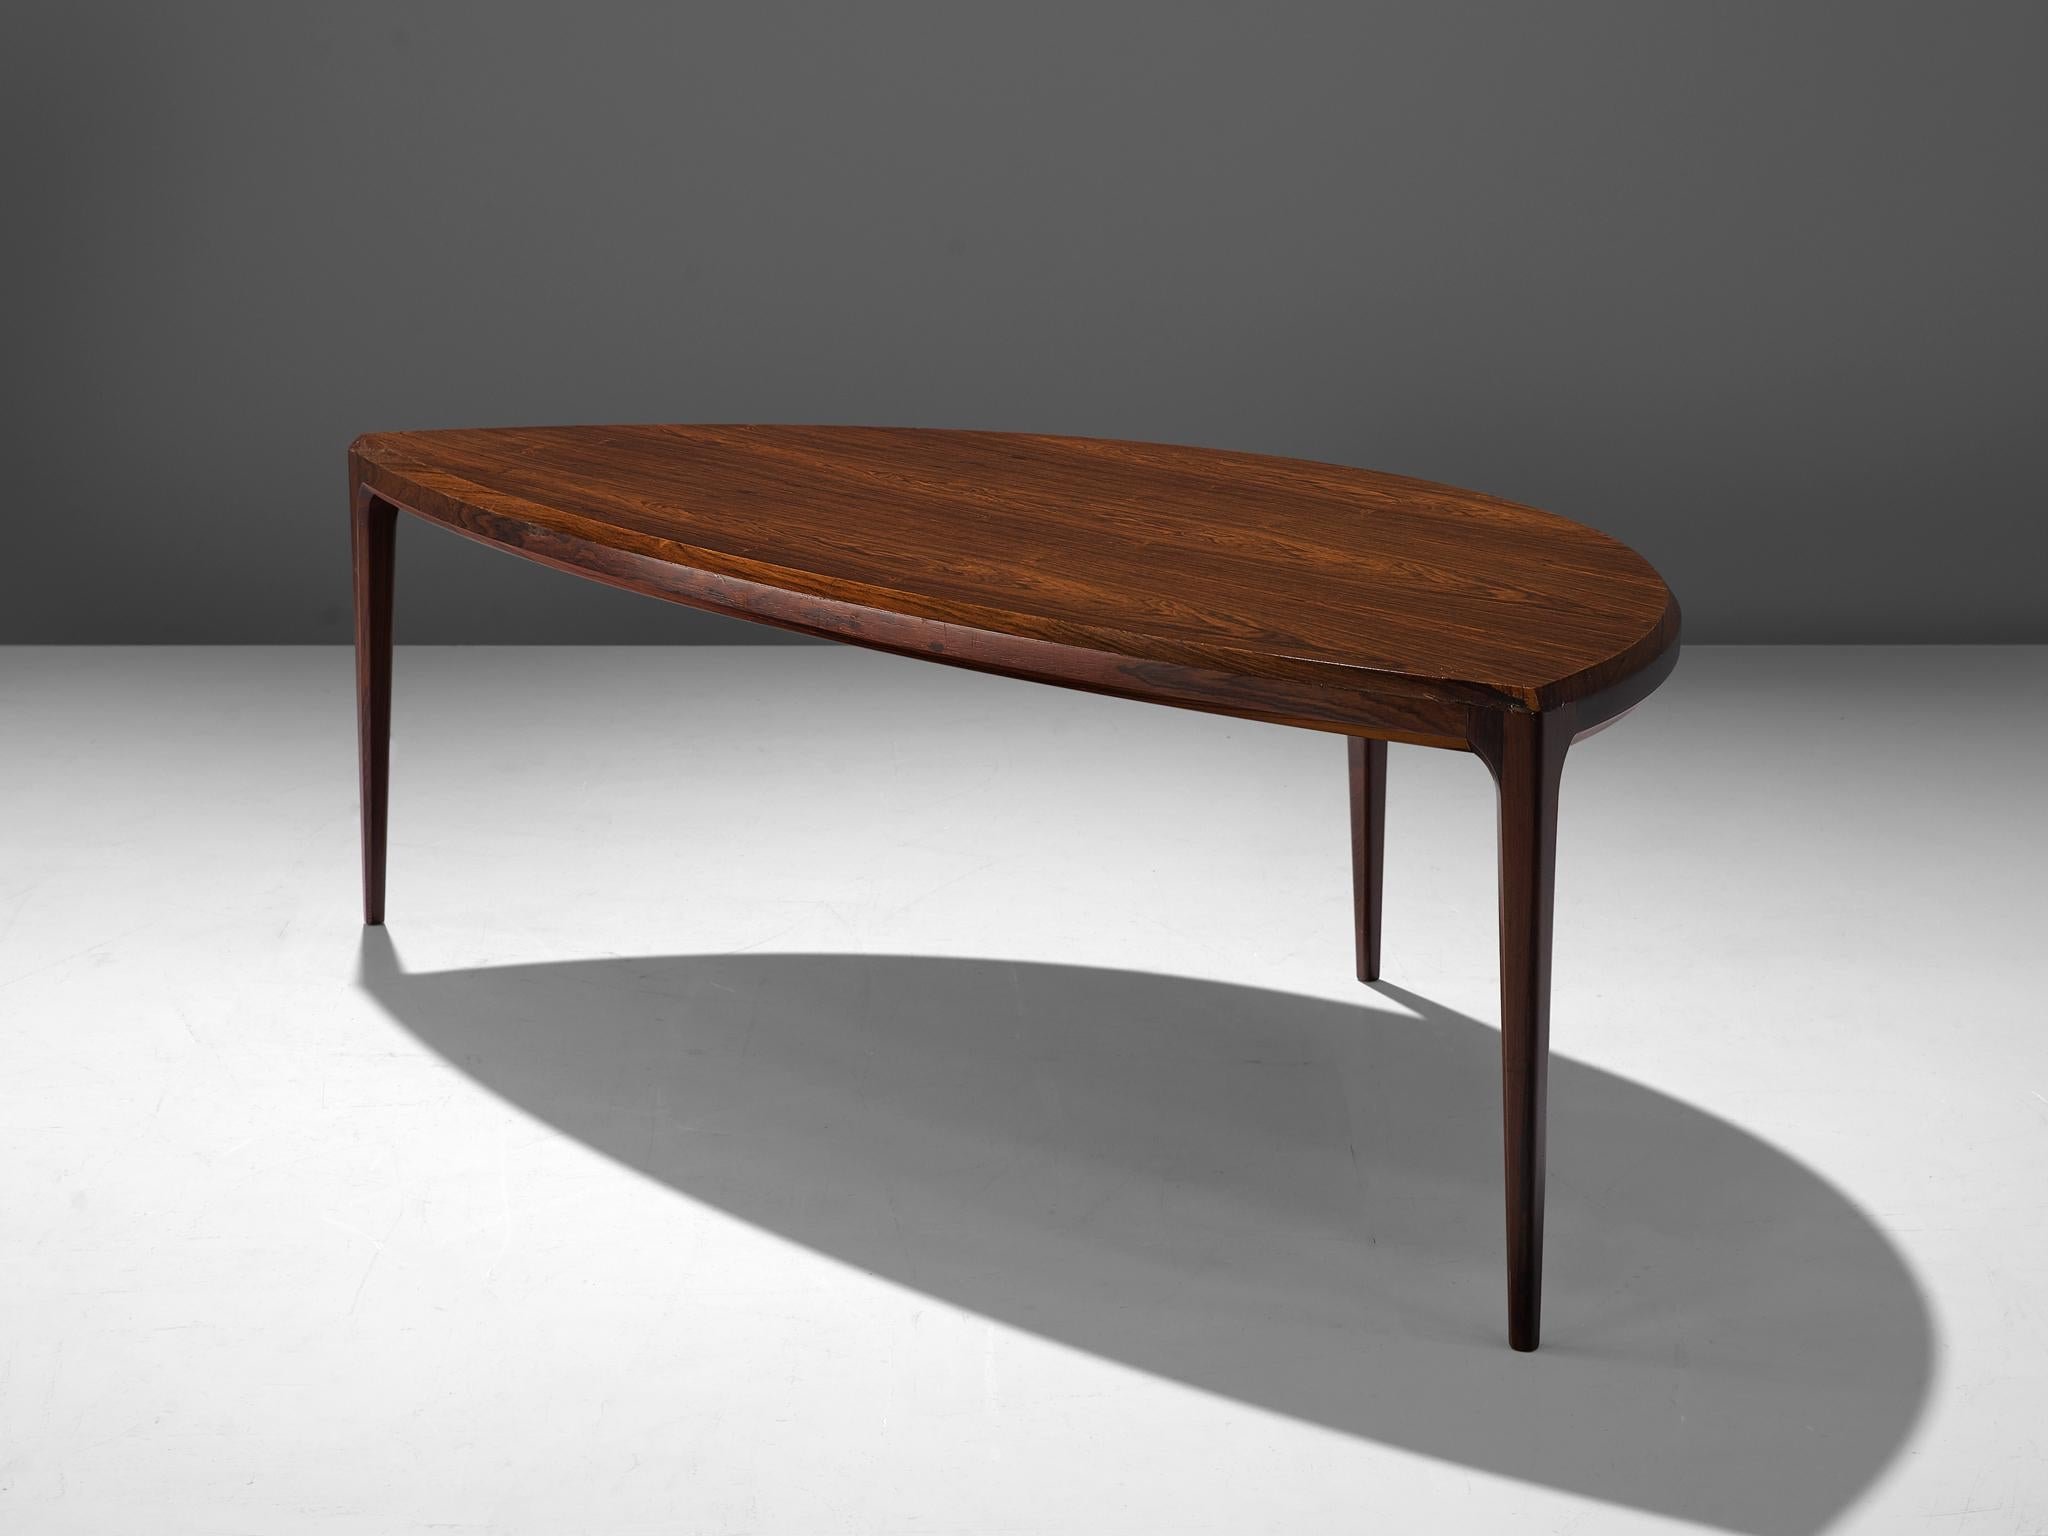 Johannes Andersen for Silkeborg, coffee table, rosewood, Denmark, 1950s.

Organic shaped coffee table in rosewood. This three legged coffee table shows the great craftsmanship of Johannes Andersen as furniture designer. The design is simplified, yet